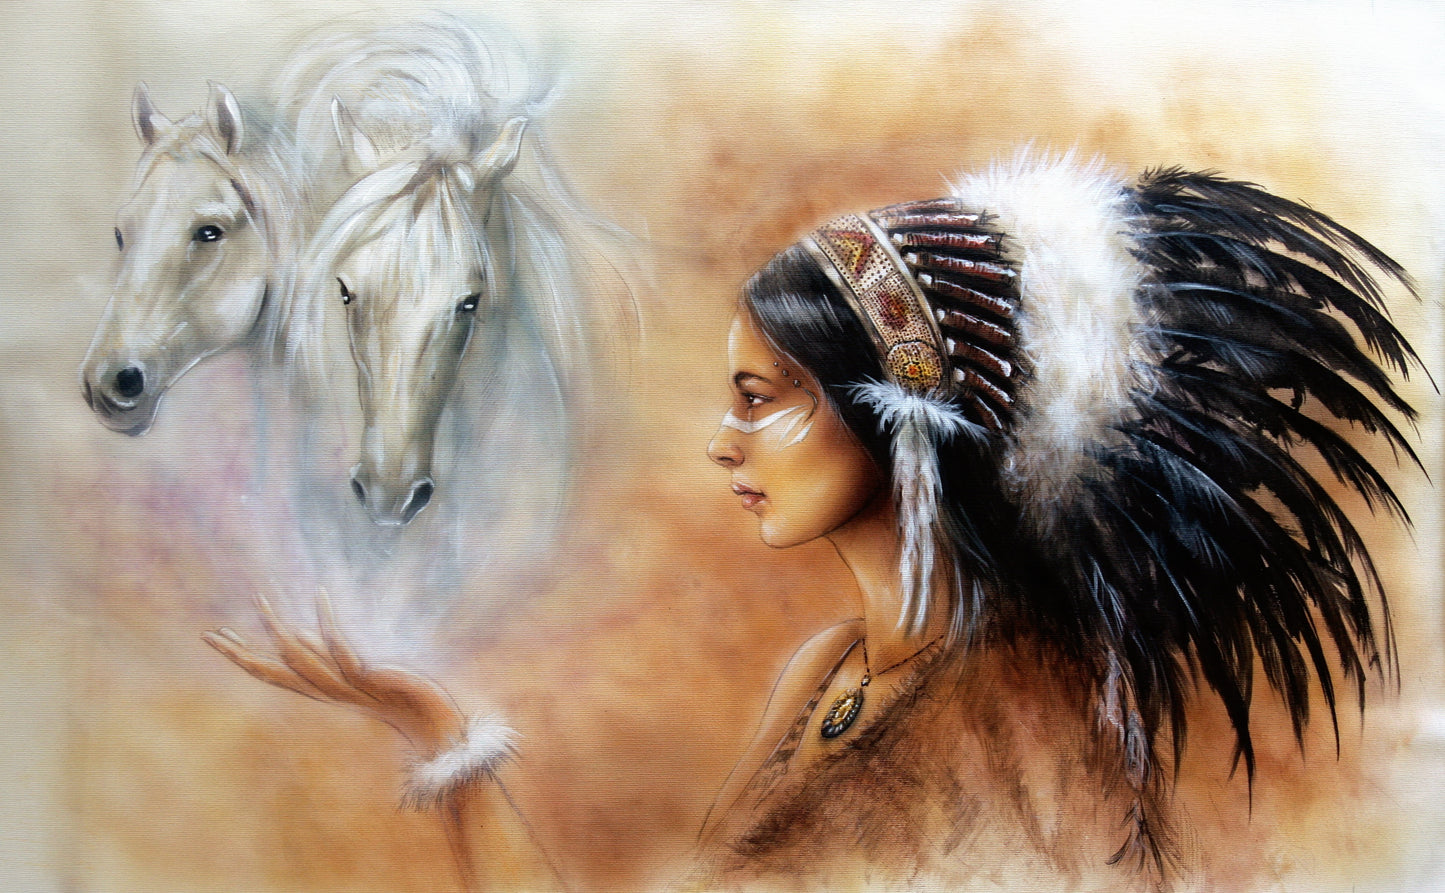 Horses & Worrior Indian Girl Face Home Decor Premium Quality Poster Print Choose Your Sizes